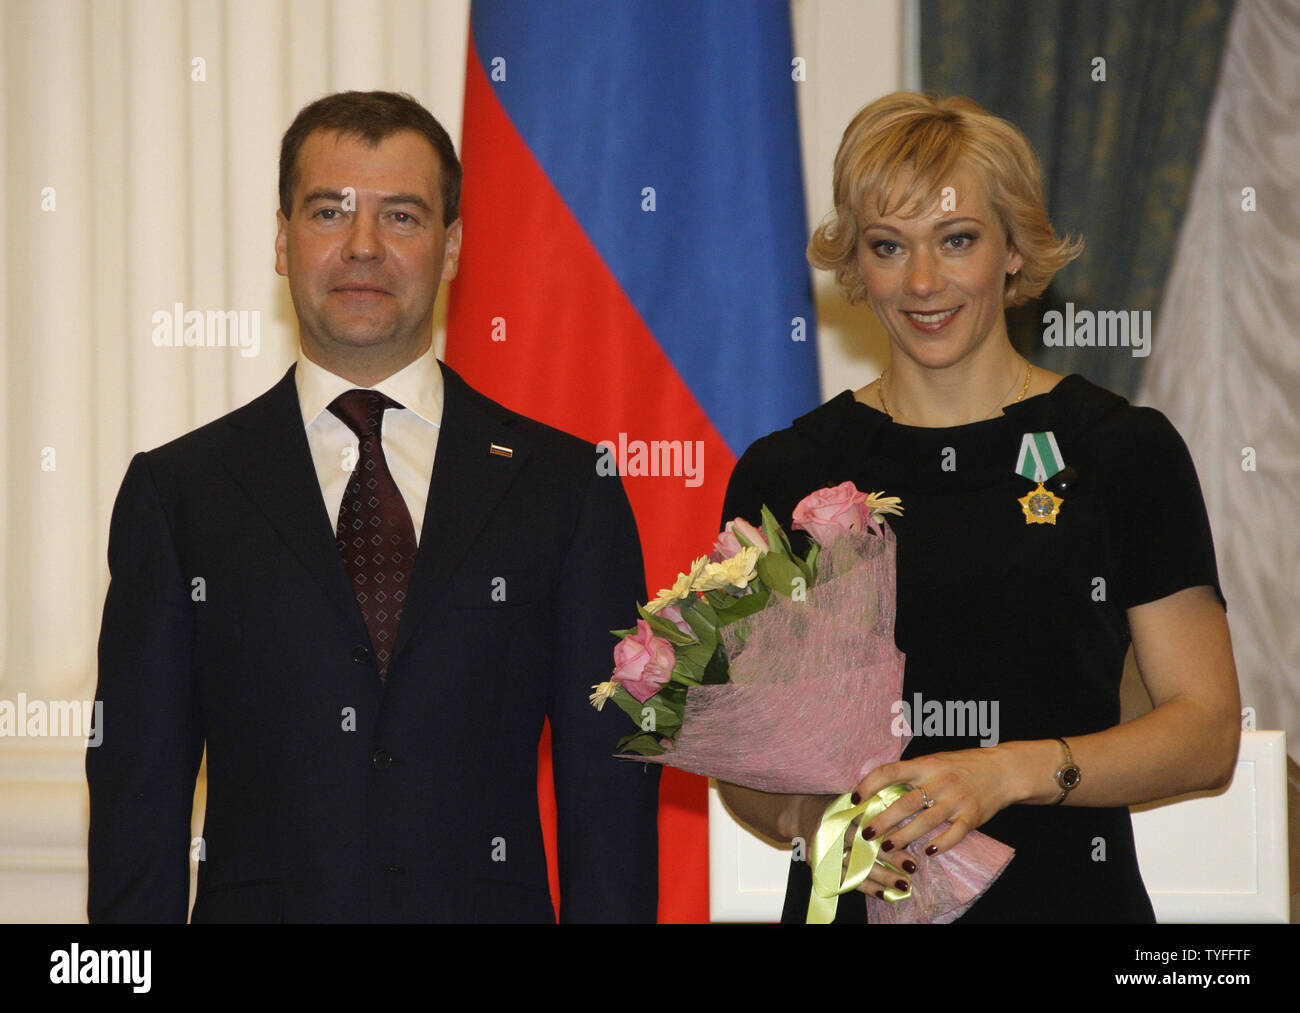 Russian President Dmitry Medvedev presents Order of Friendship to biathlete Olga Zaytseva in the Kremlin in Moscow on March 15, 2010. Zaytseva won gold and silver medals at the Winter Olympic Games in Vancouver. UPI/Alex Natin Stock Photo